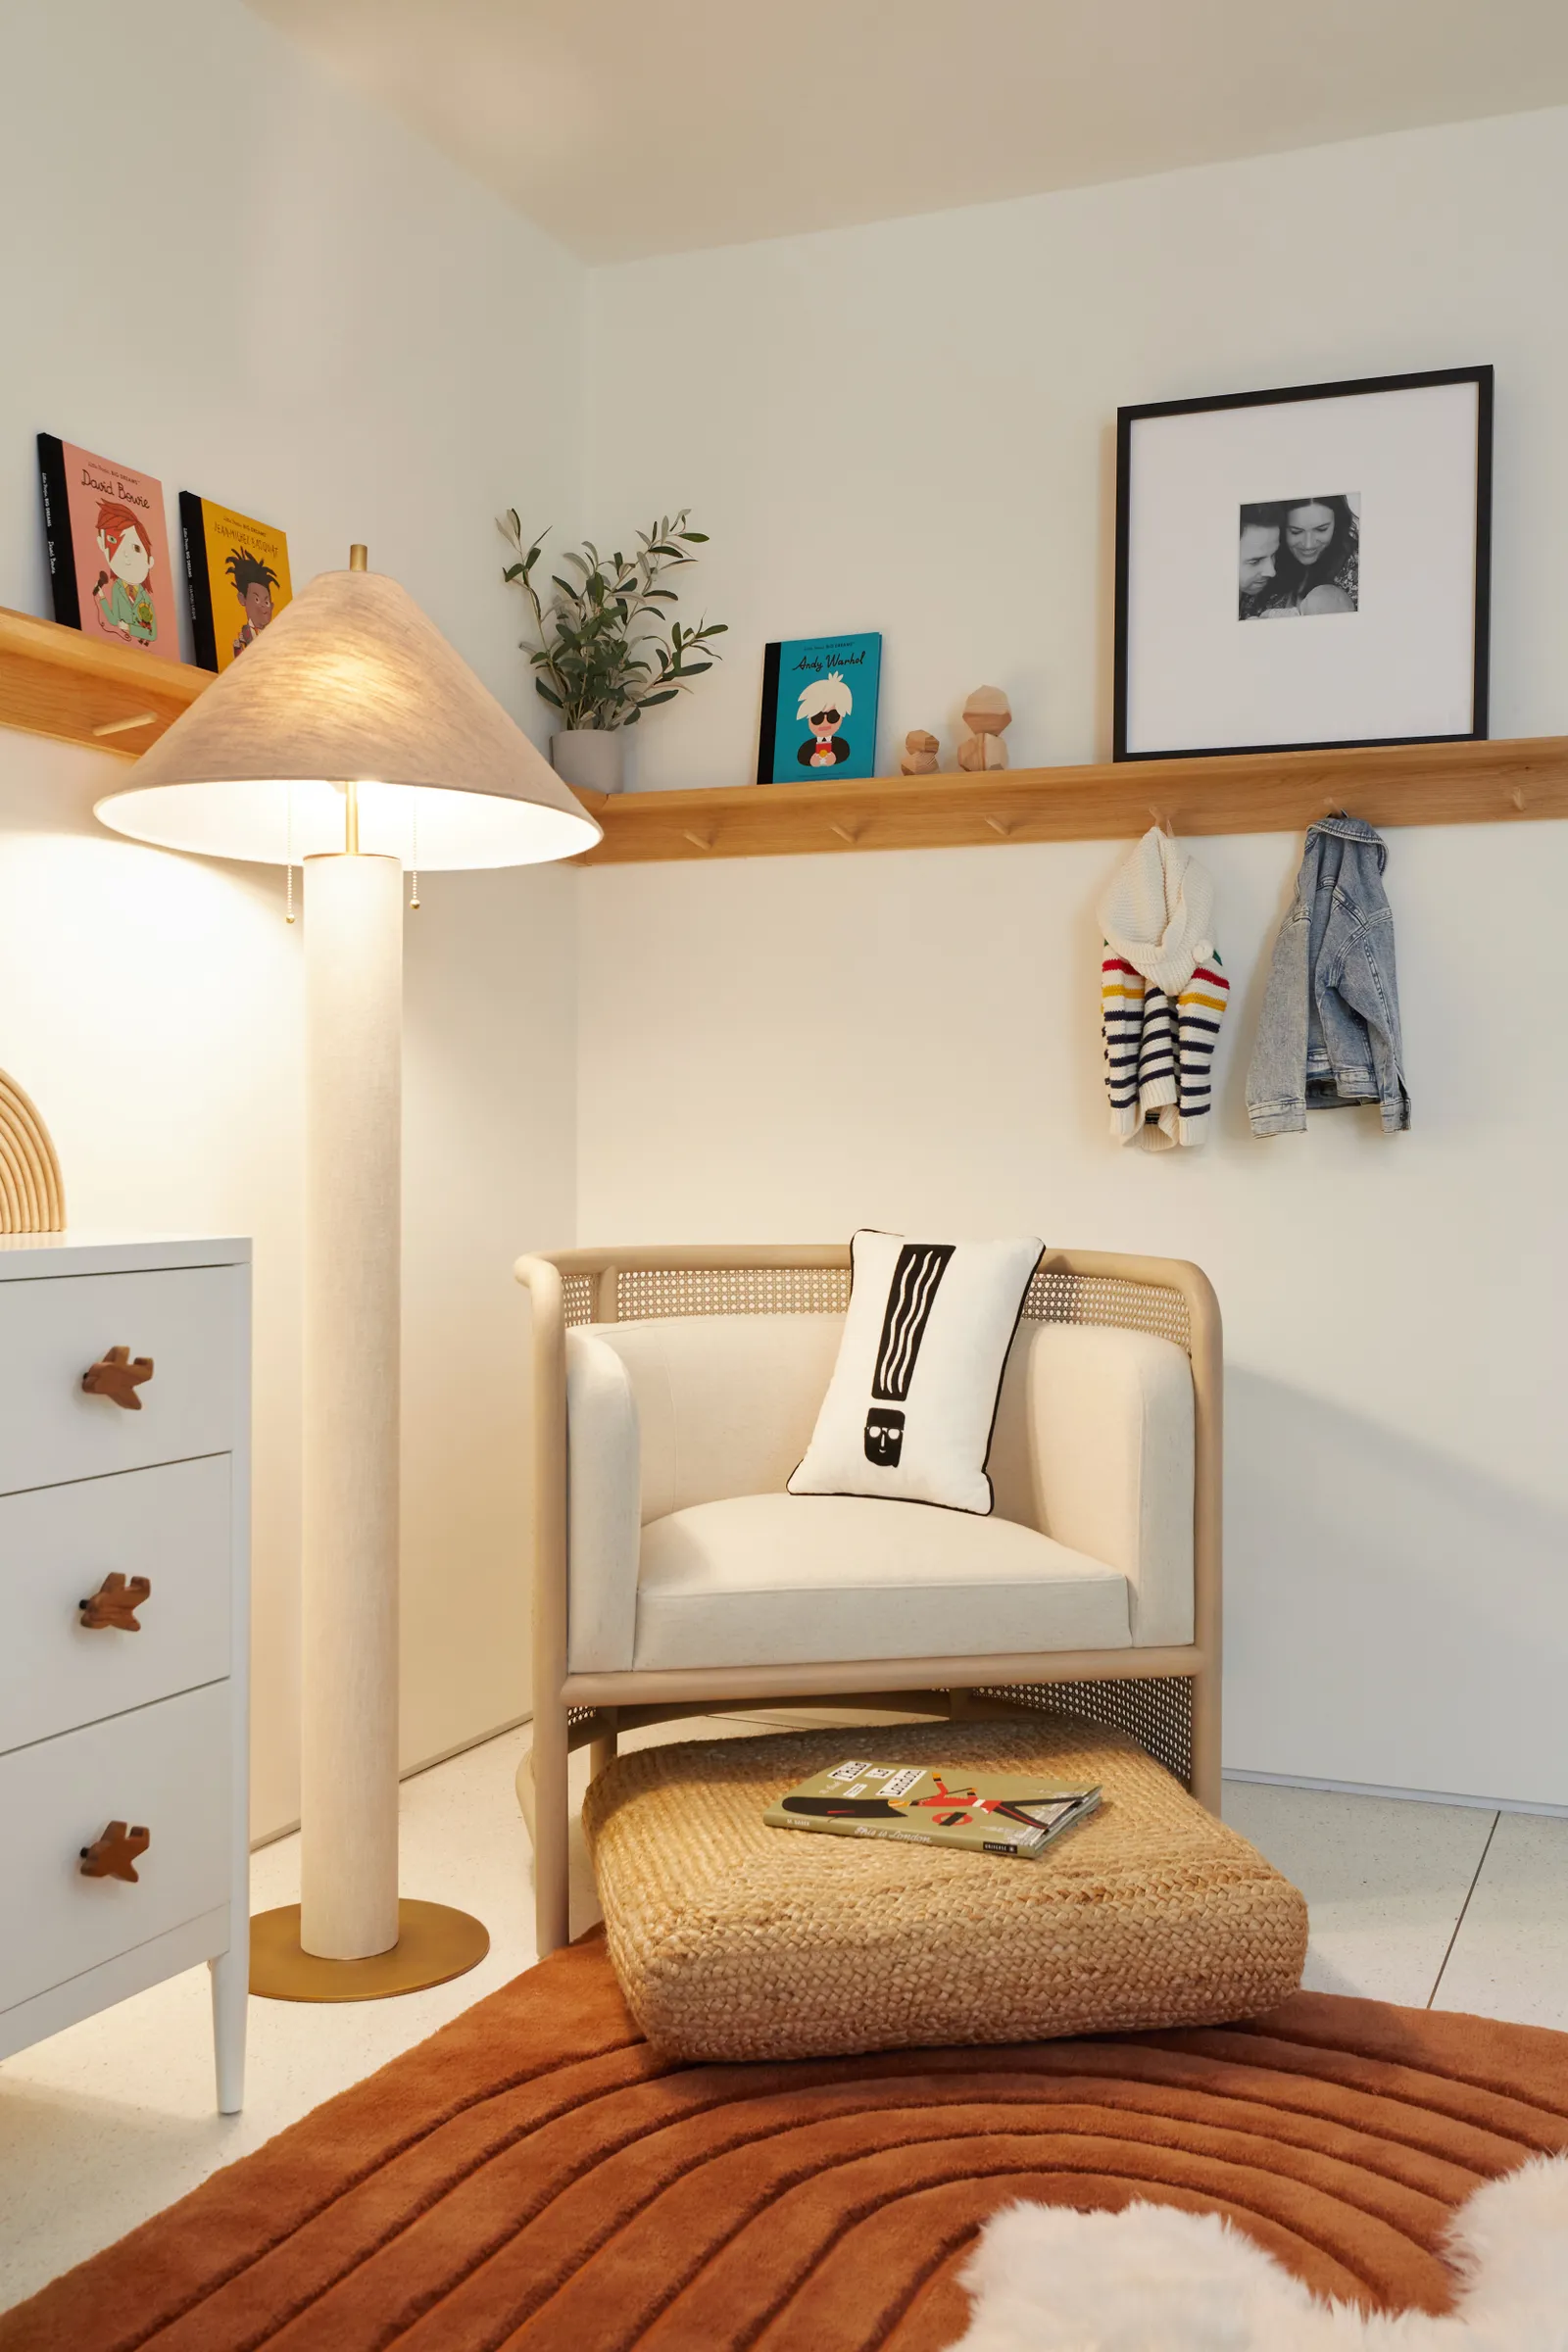 Kids room-a haven where your child can be
comfortable